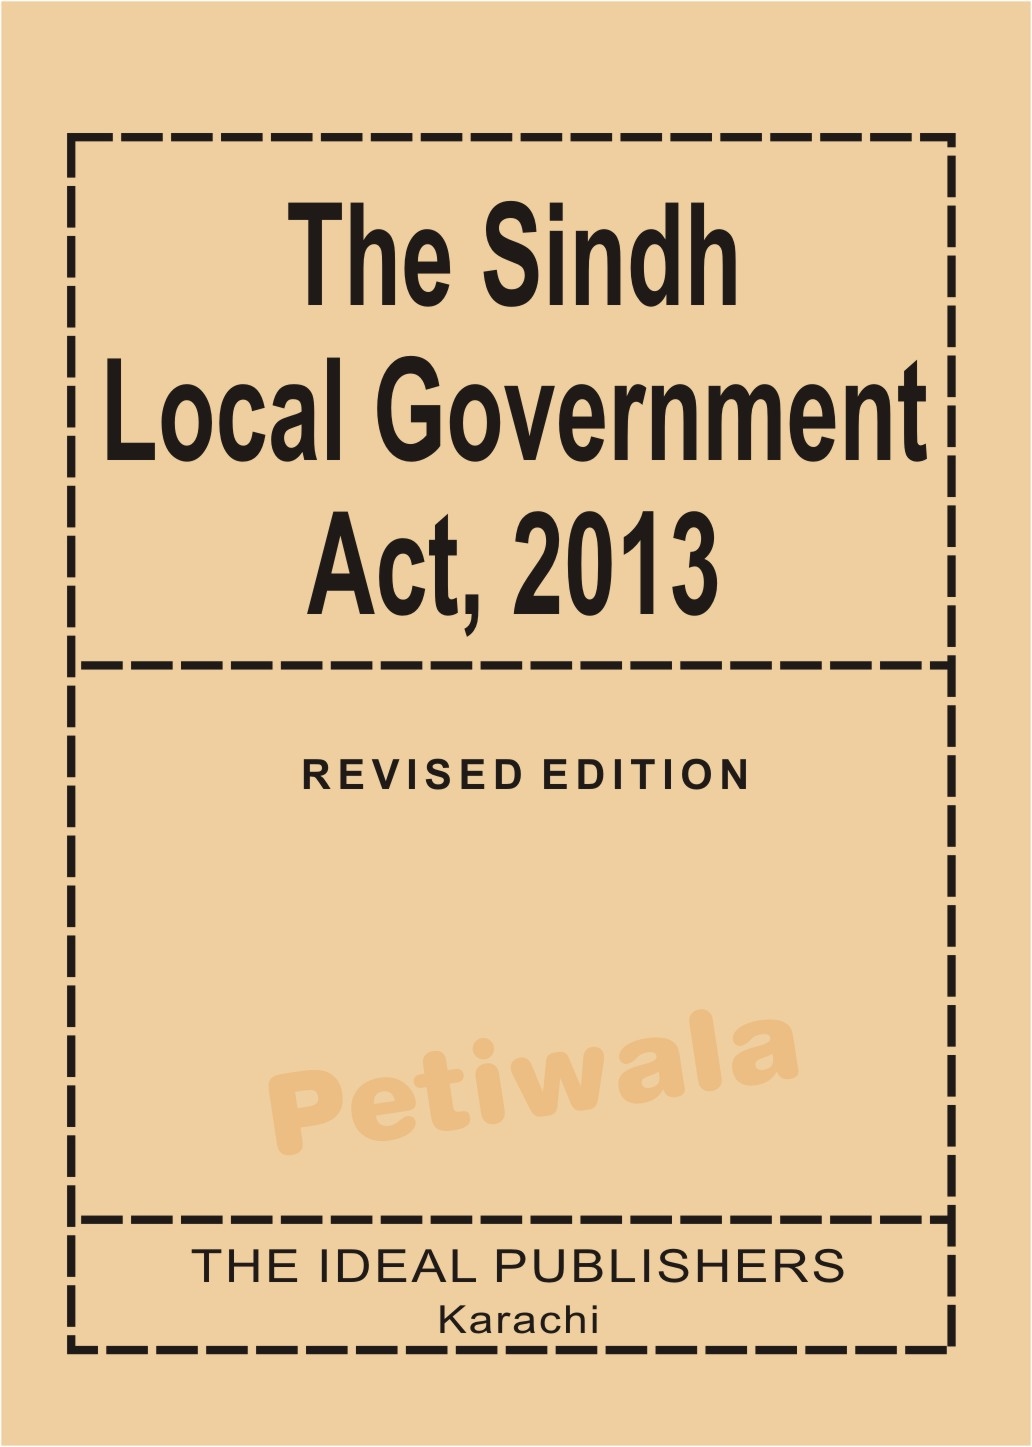 The Sindh Local Government Act, 2013